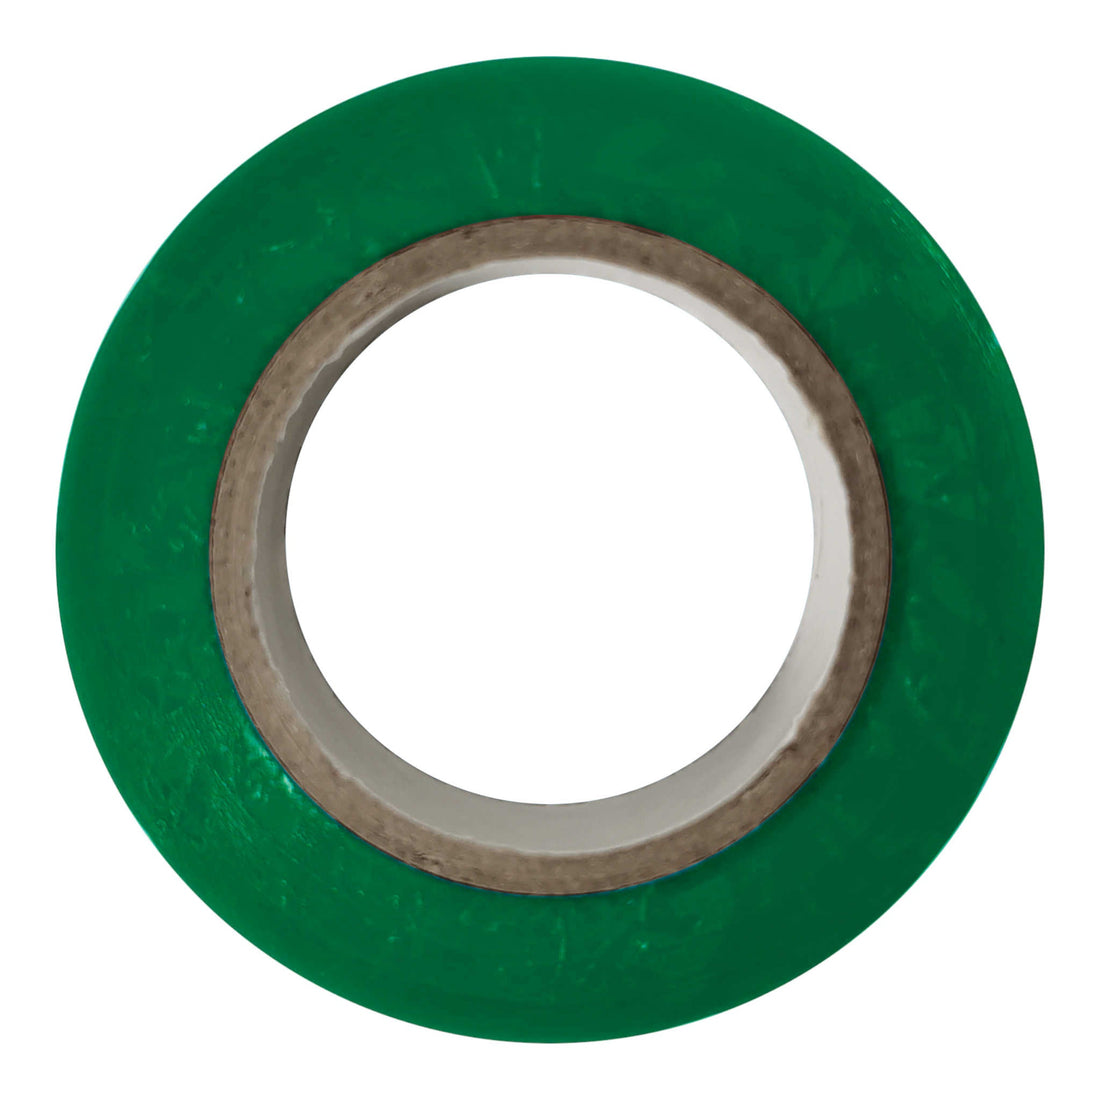 PVC Electrical Insulation Tape | 0.18 x 19mm x 18m | Green